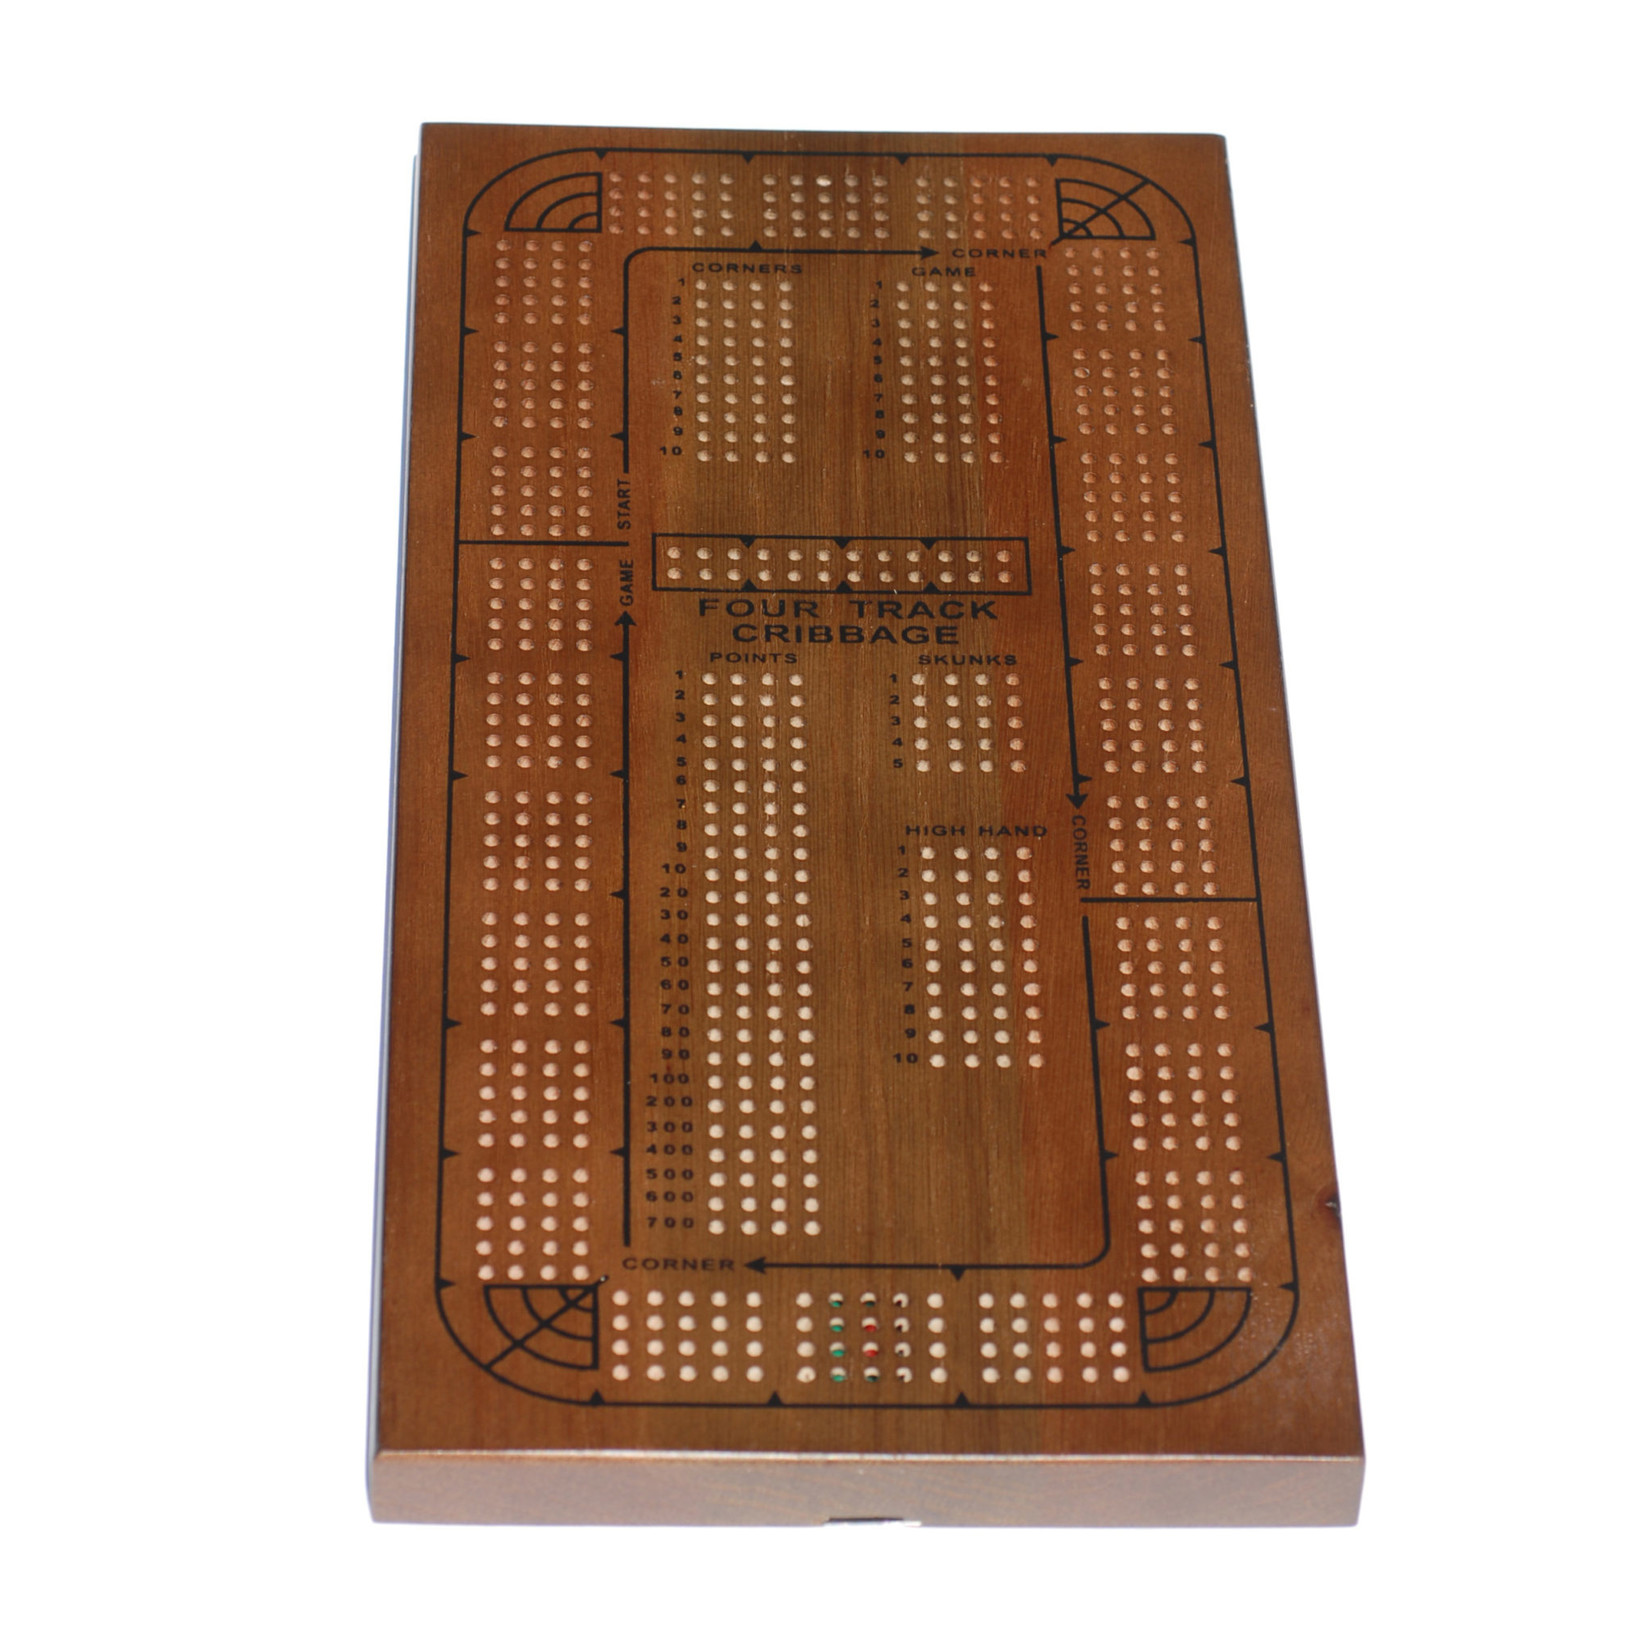 Wood Expressions Cribbage 4-Track Stained Oak